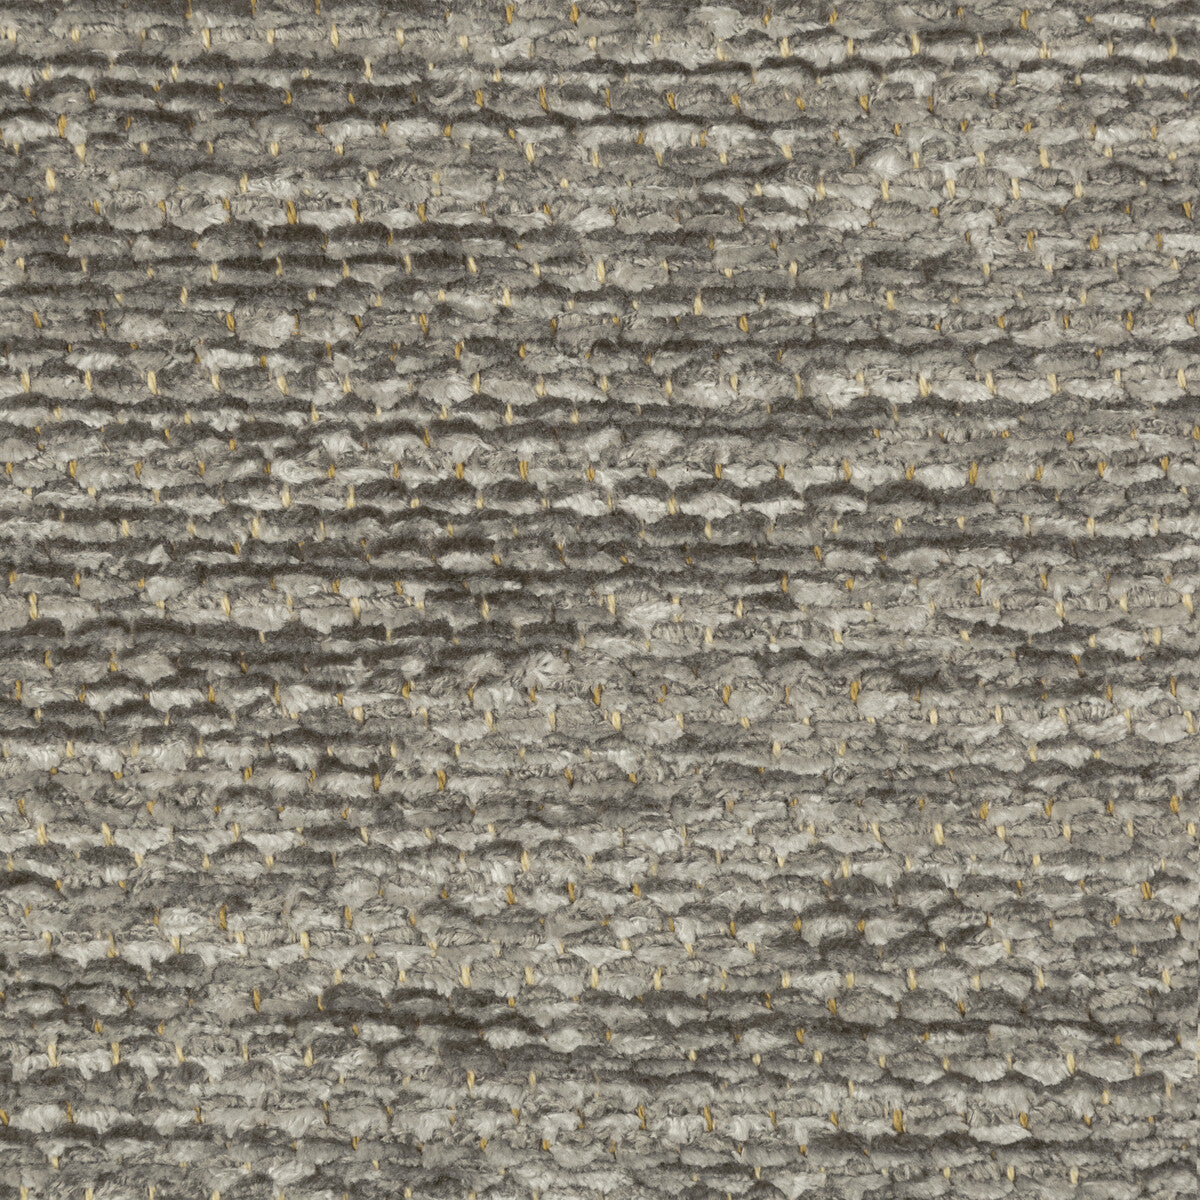 Chamoux Texture fabric in mink color - pattern 8019145.11.0 - by Brunschwig &amp; Fils in the Chambery Textures II collection